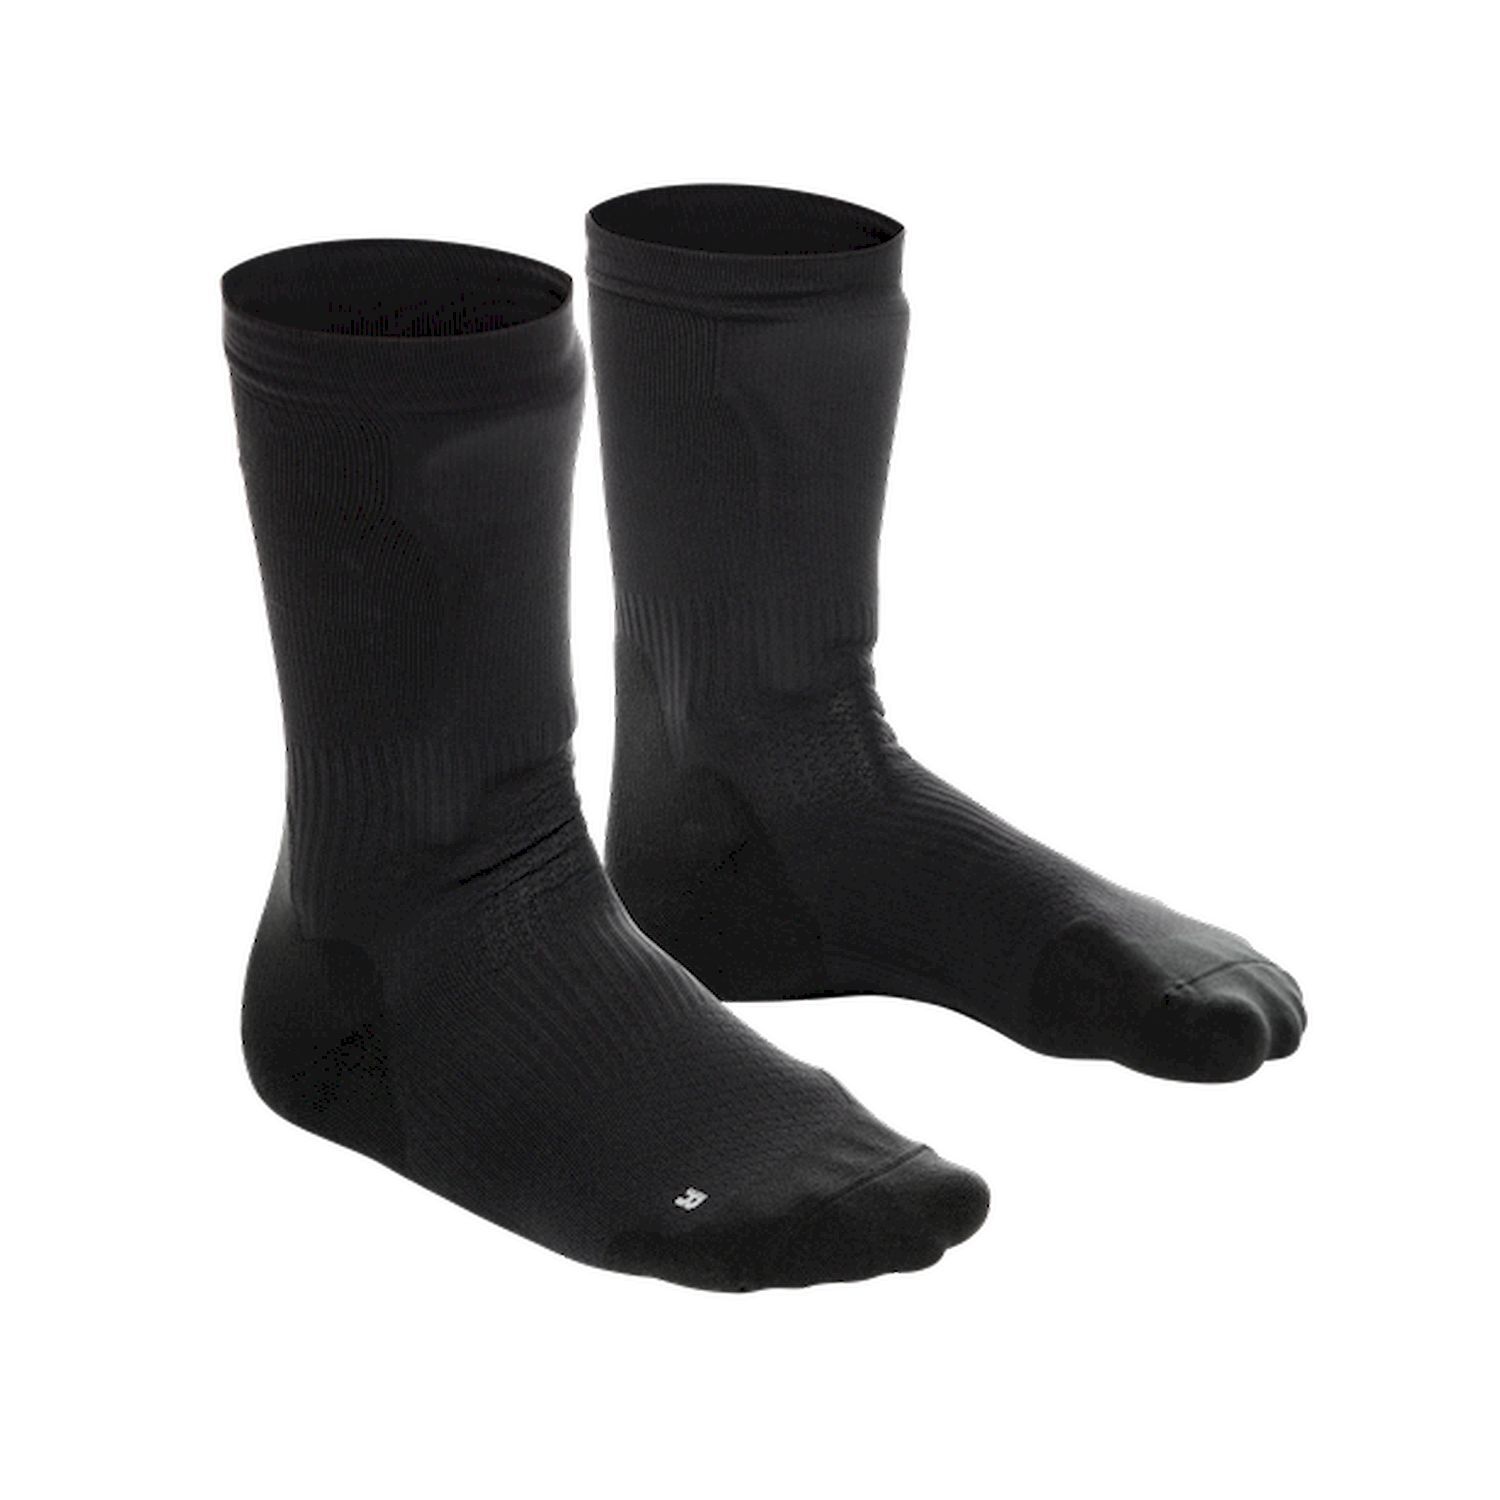 Dainese Hgr - Calcetines ciclismo